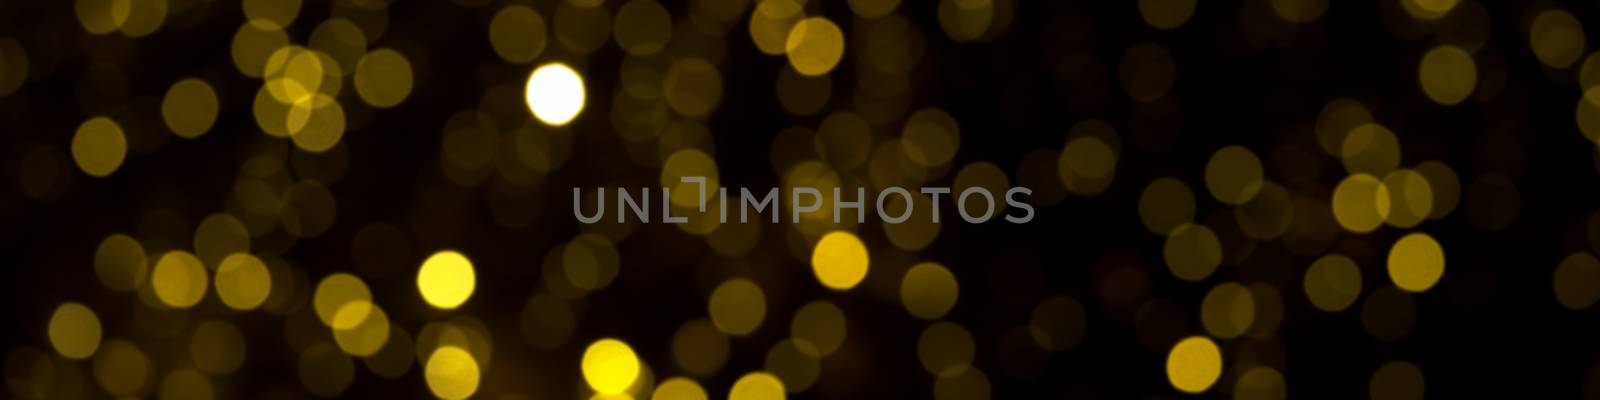 defocused gold christmas lights on dark background. yellow bokeh circles on black backdrop, christmas abstract background